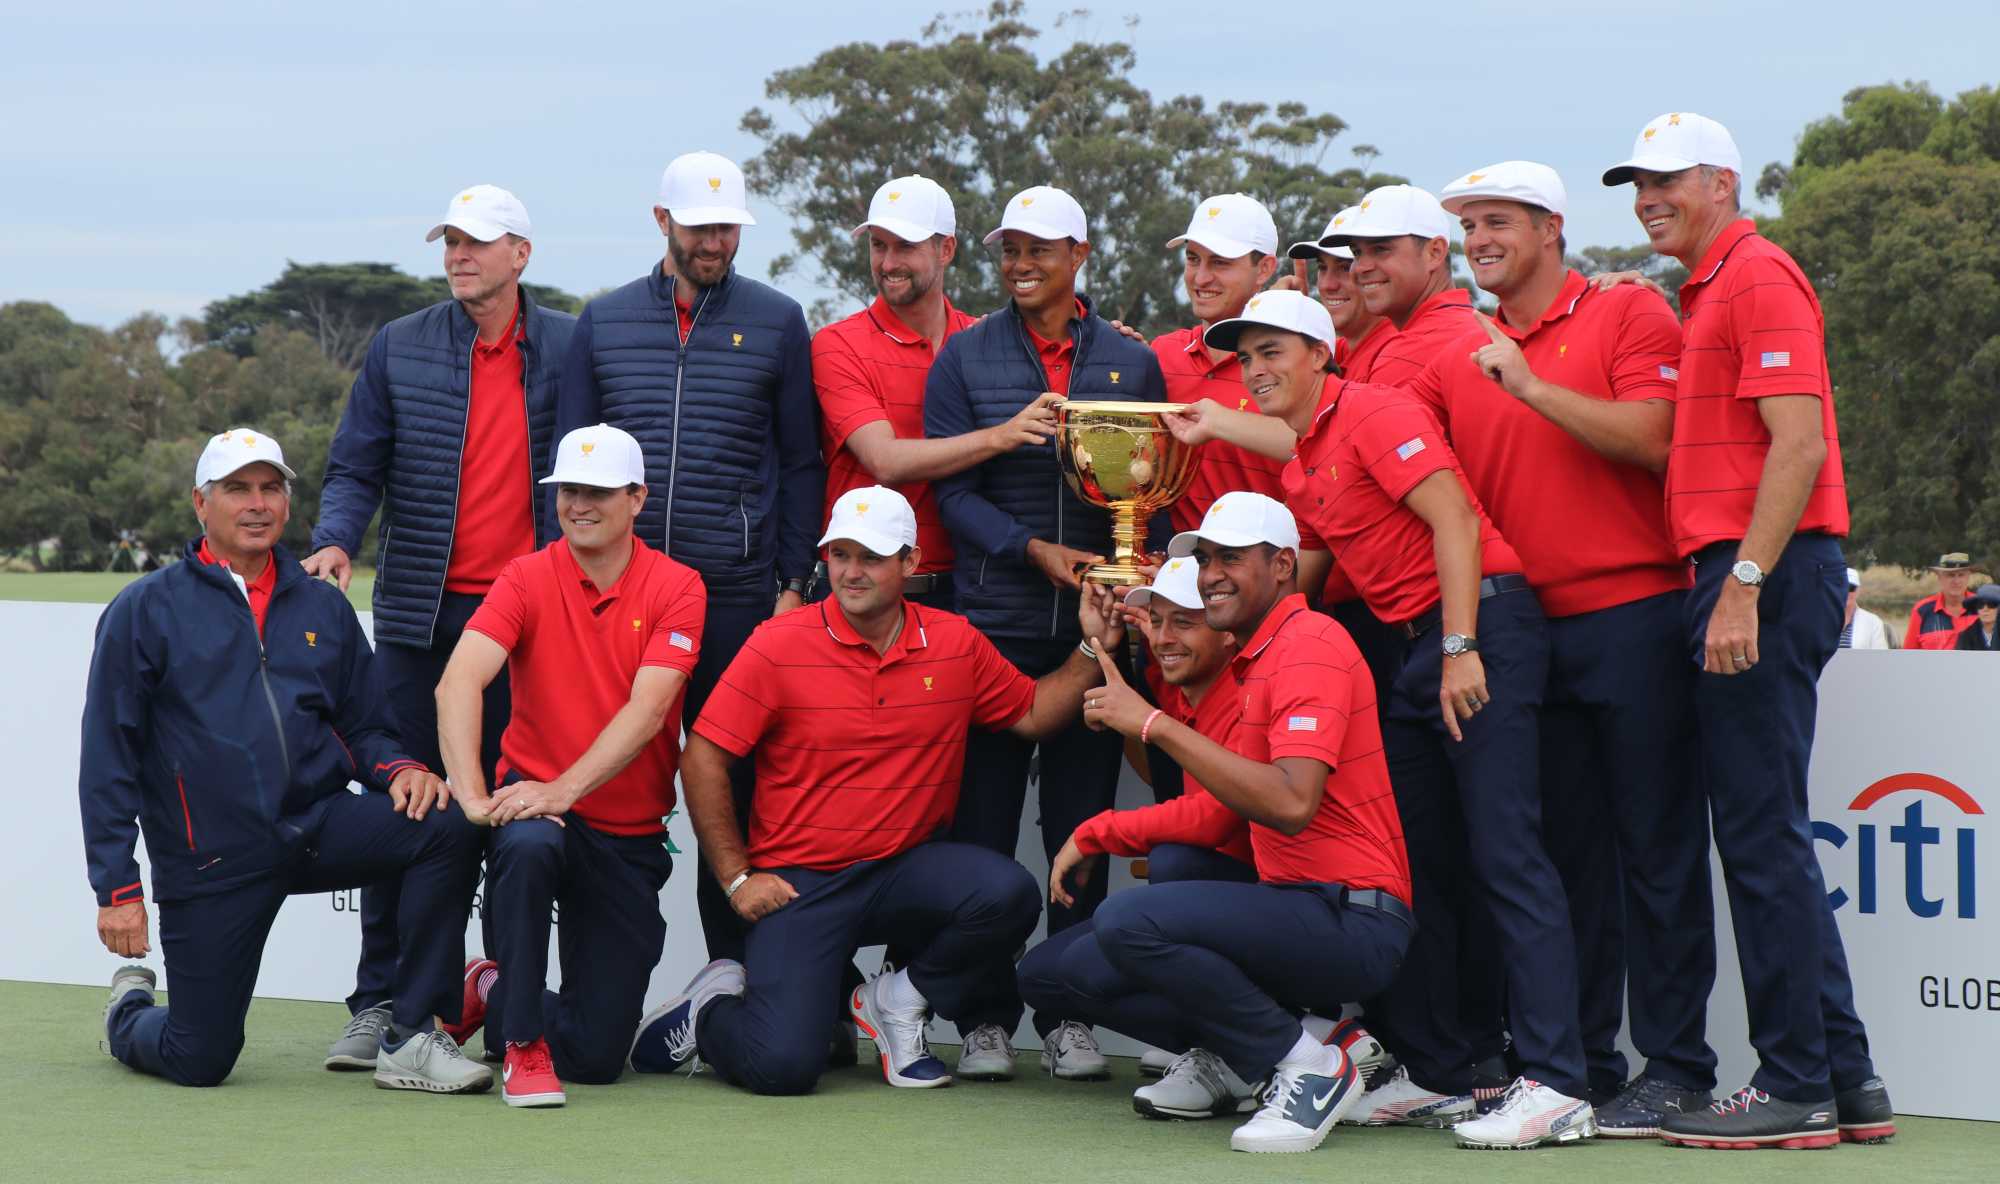 Team USA win the 2019 Presidents Cup